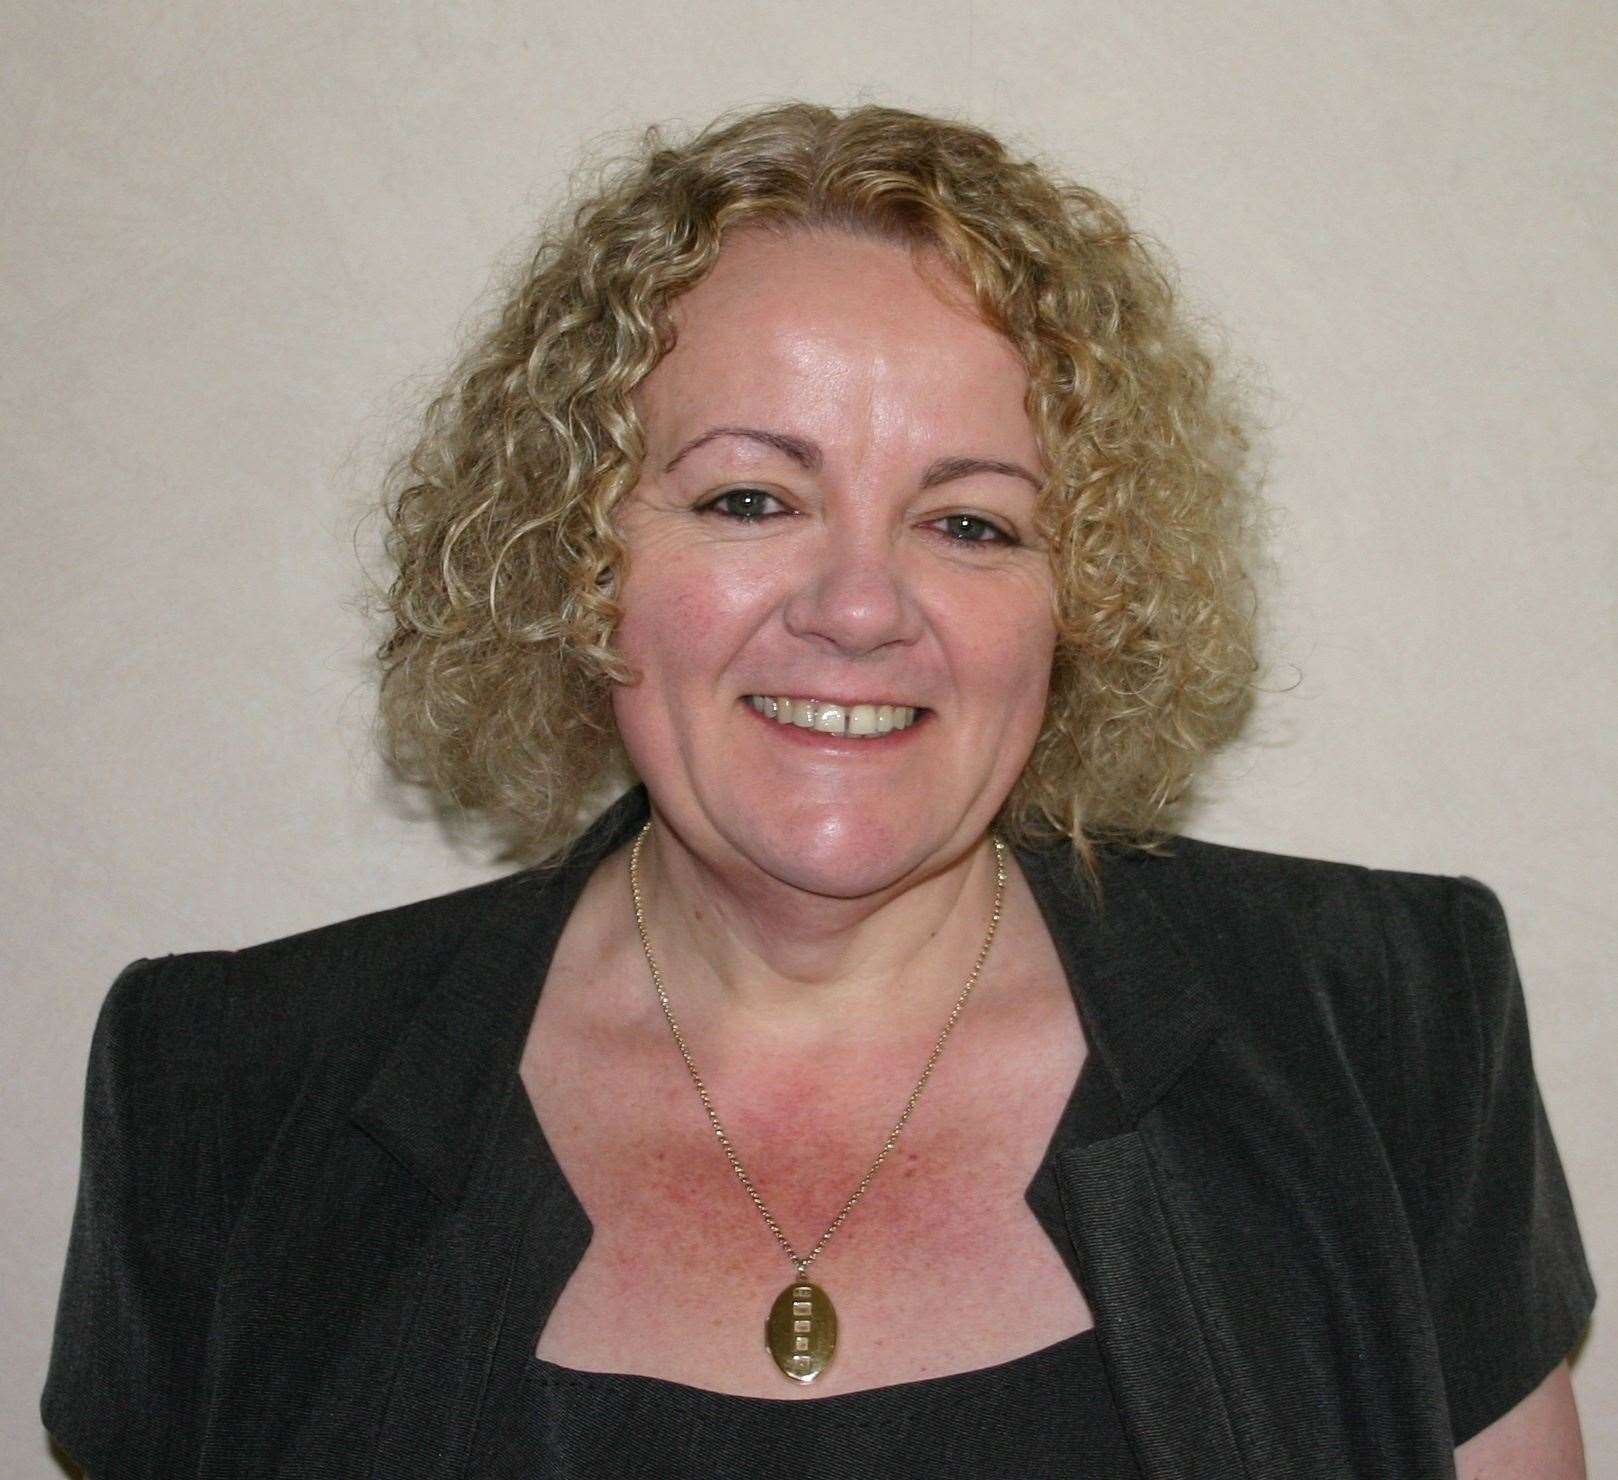 The council's chief executive Julie Beilby